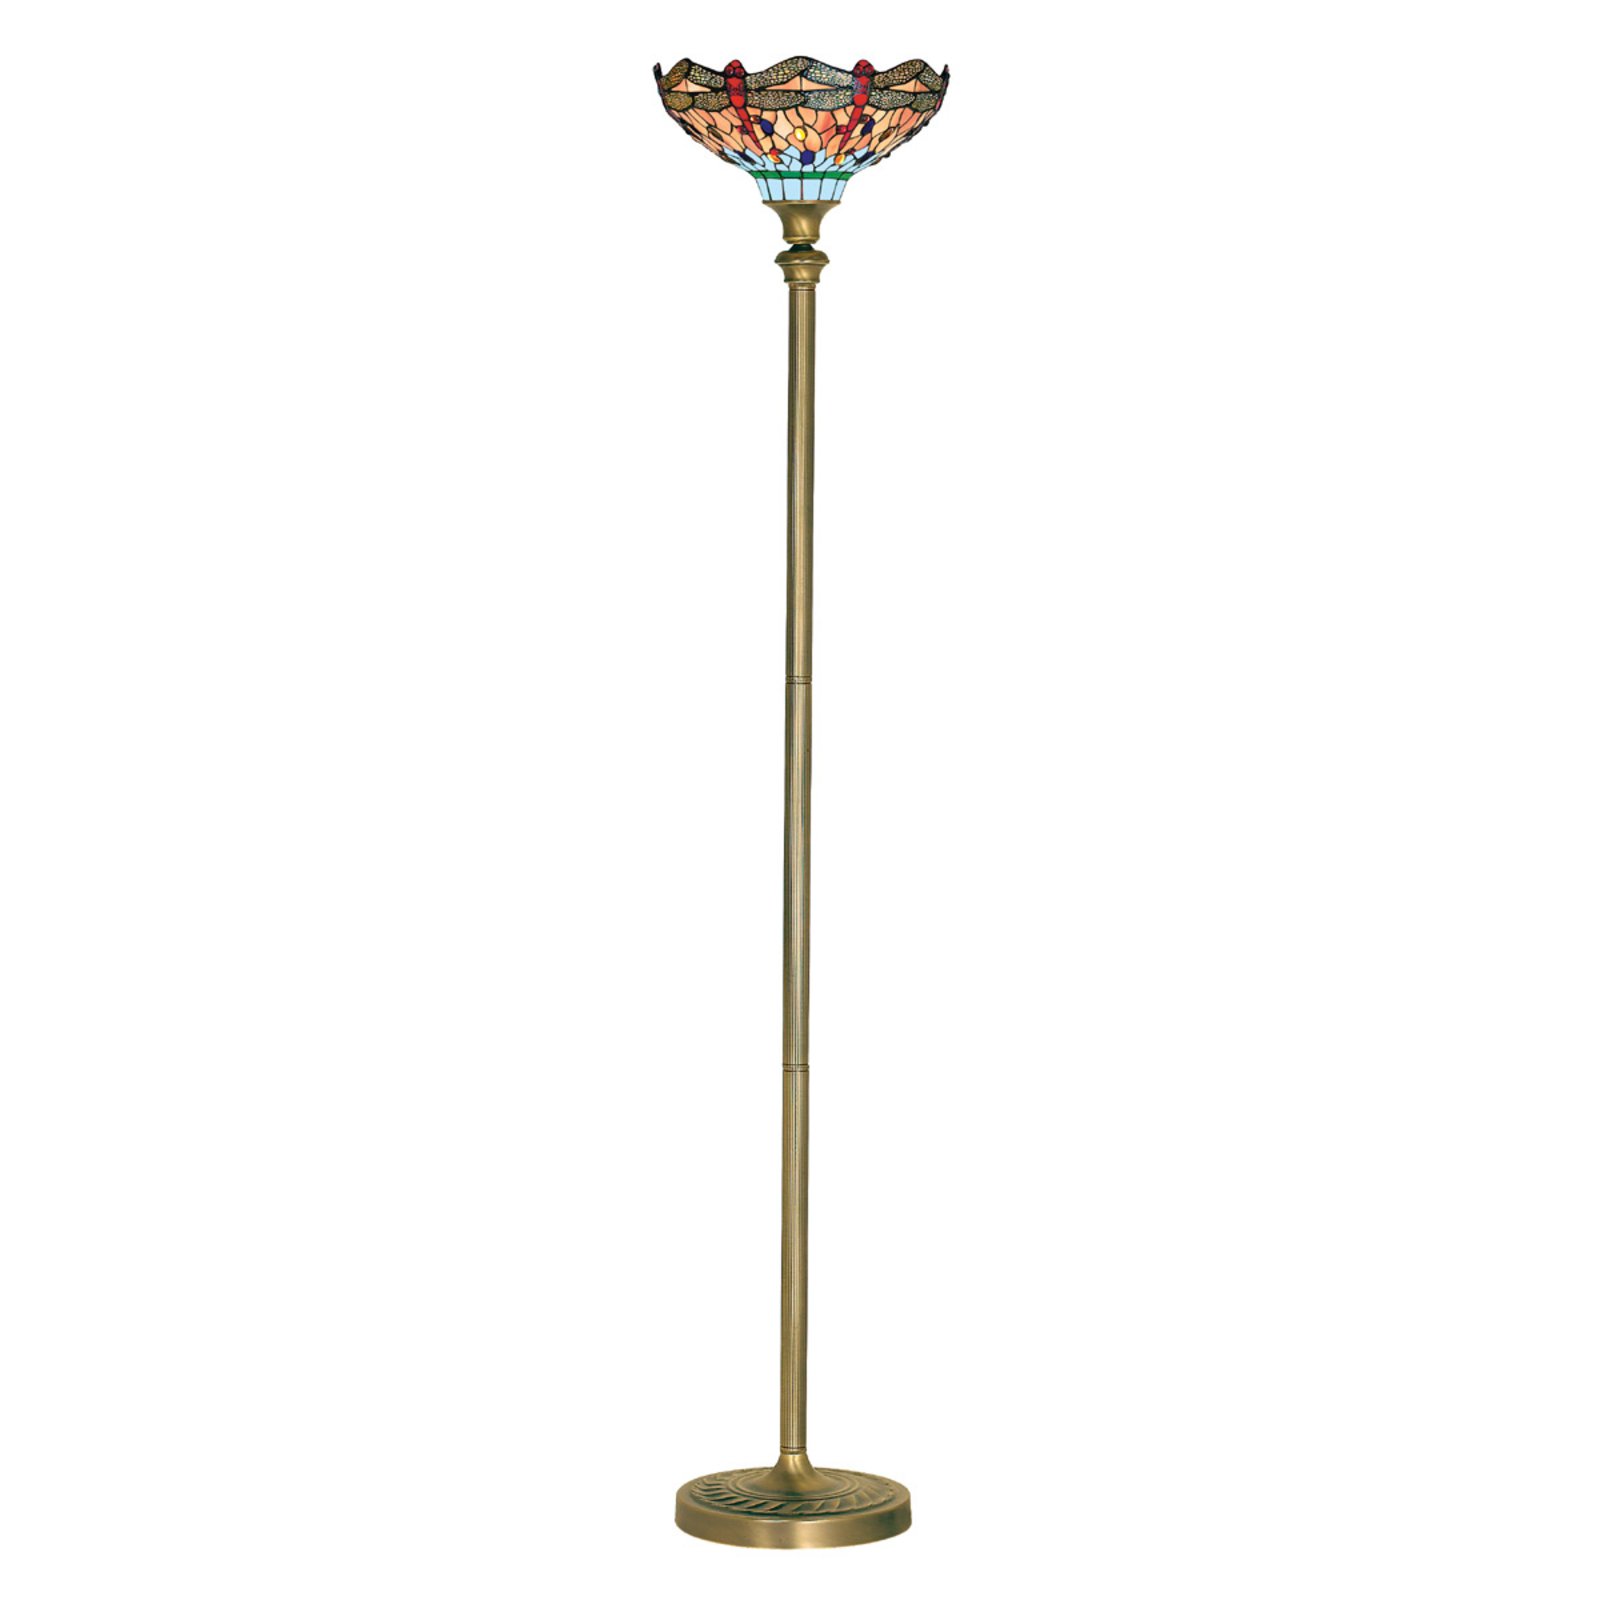 Dragonfly floor lamp in a Tiffany style